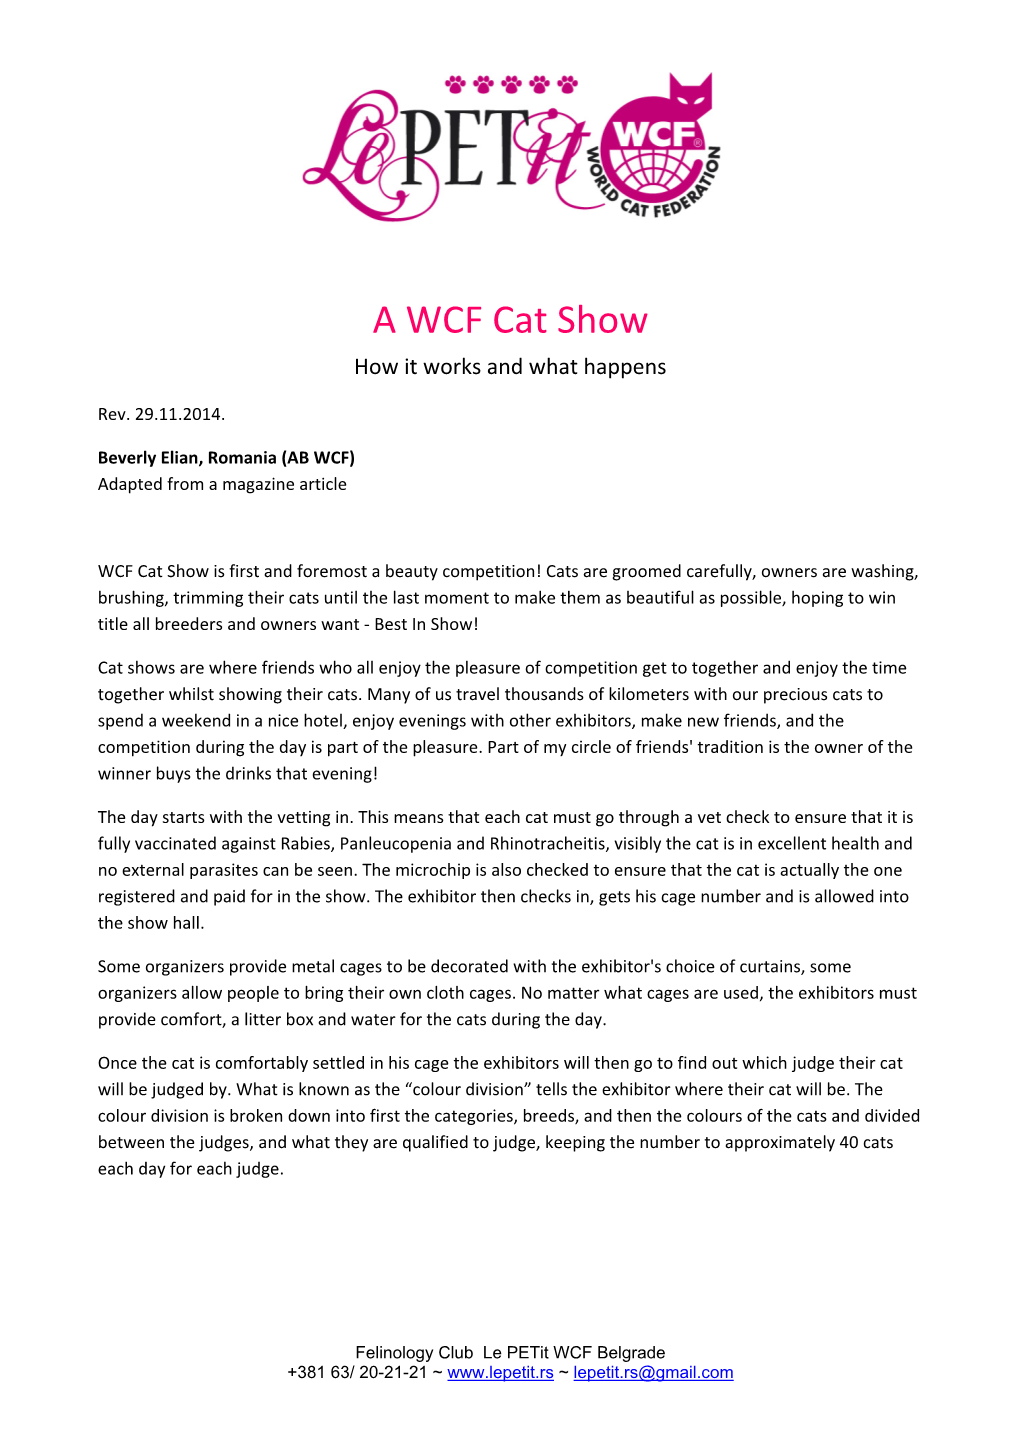 A WCF Cat Show How It Works and What Happens